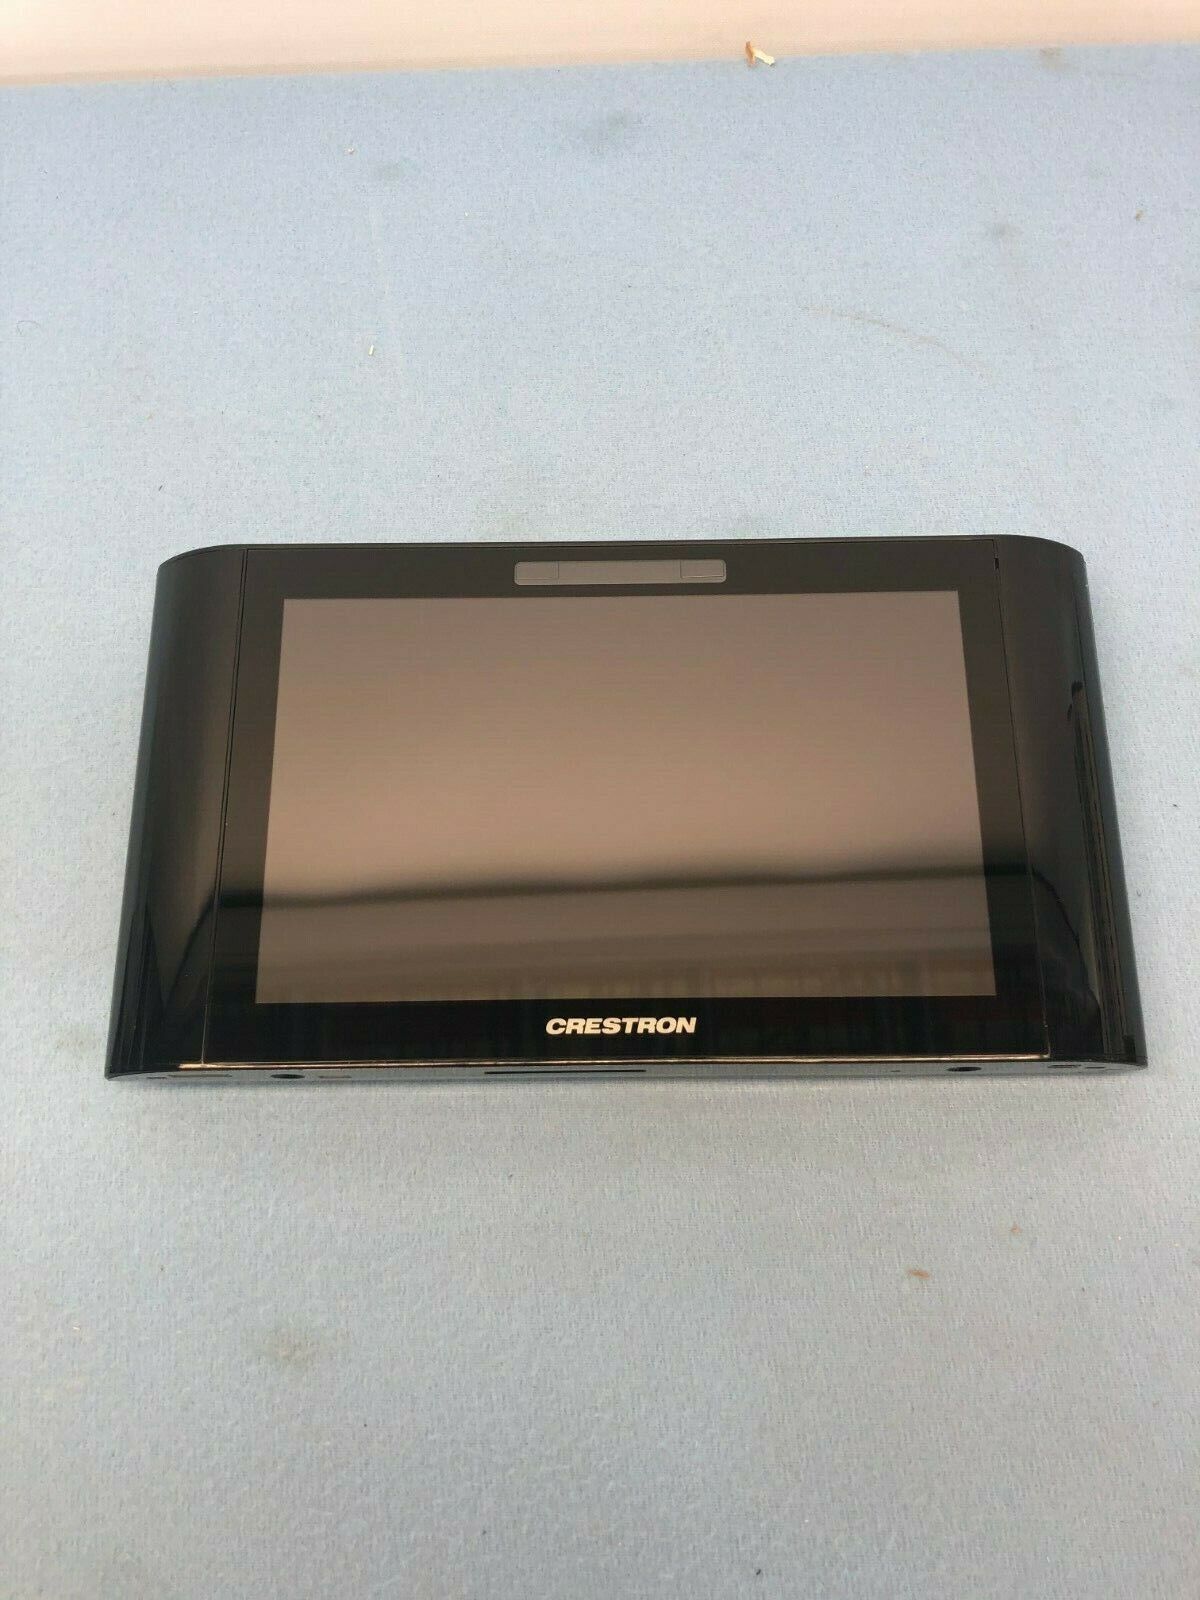 Crestron 6507104 TSCW-730-B-S 7" Touch Screen Control System